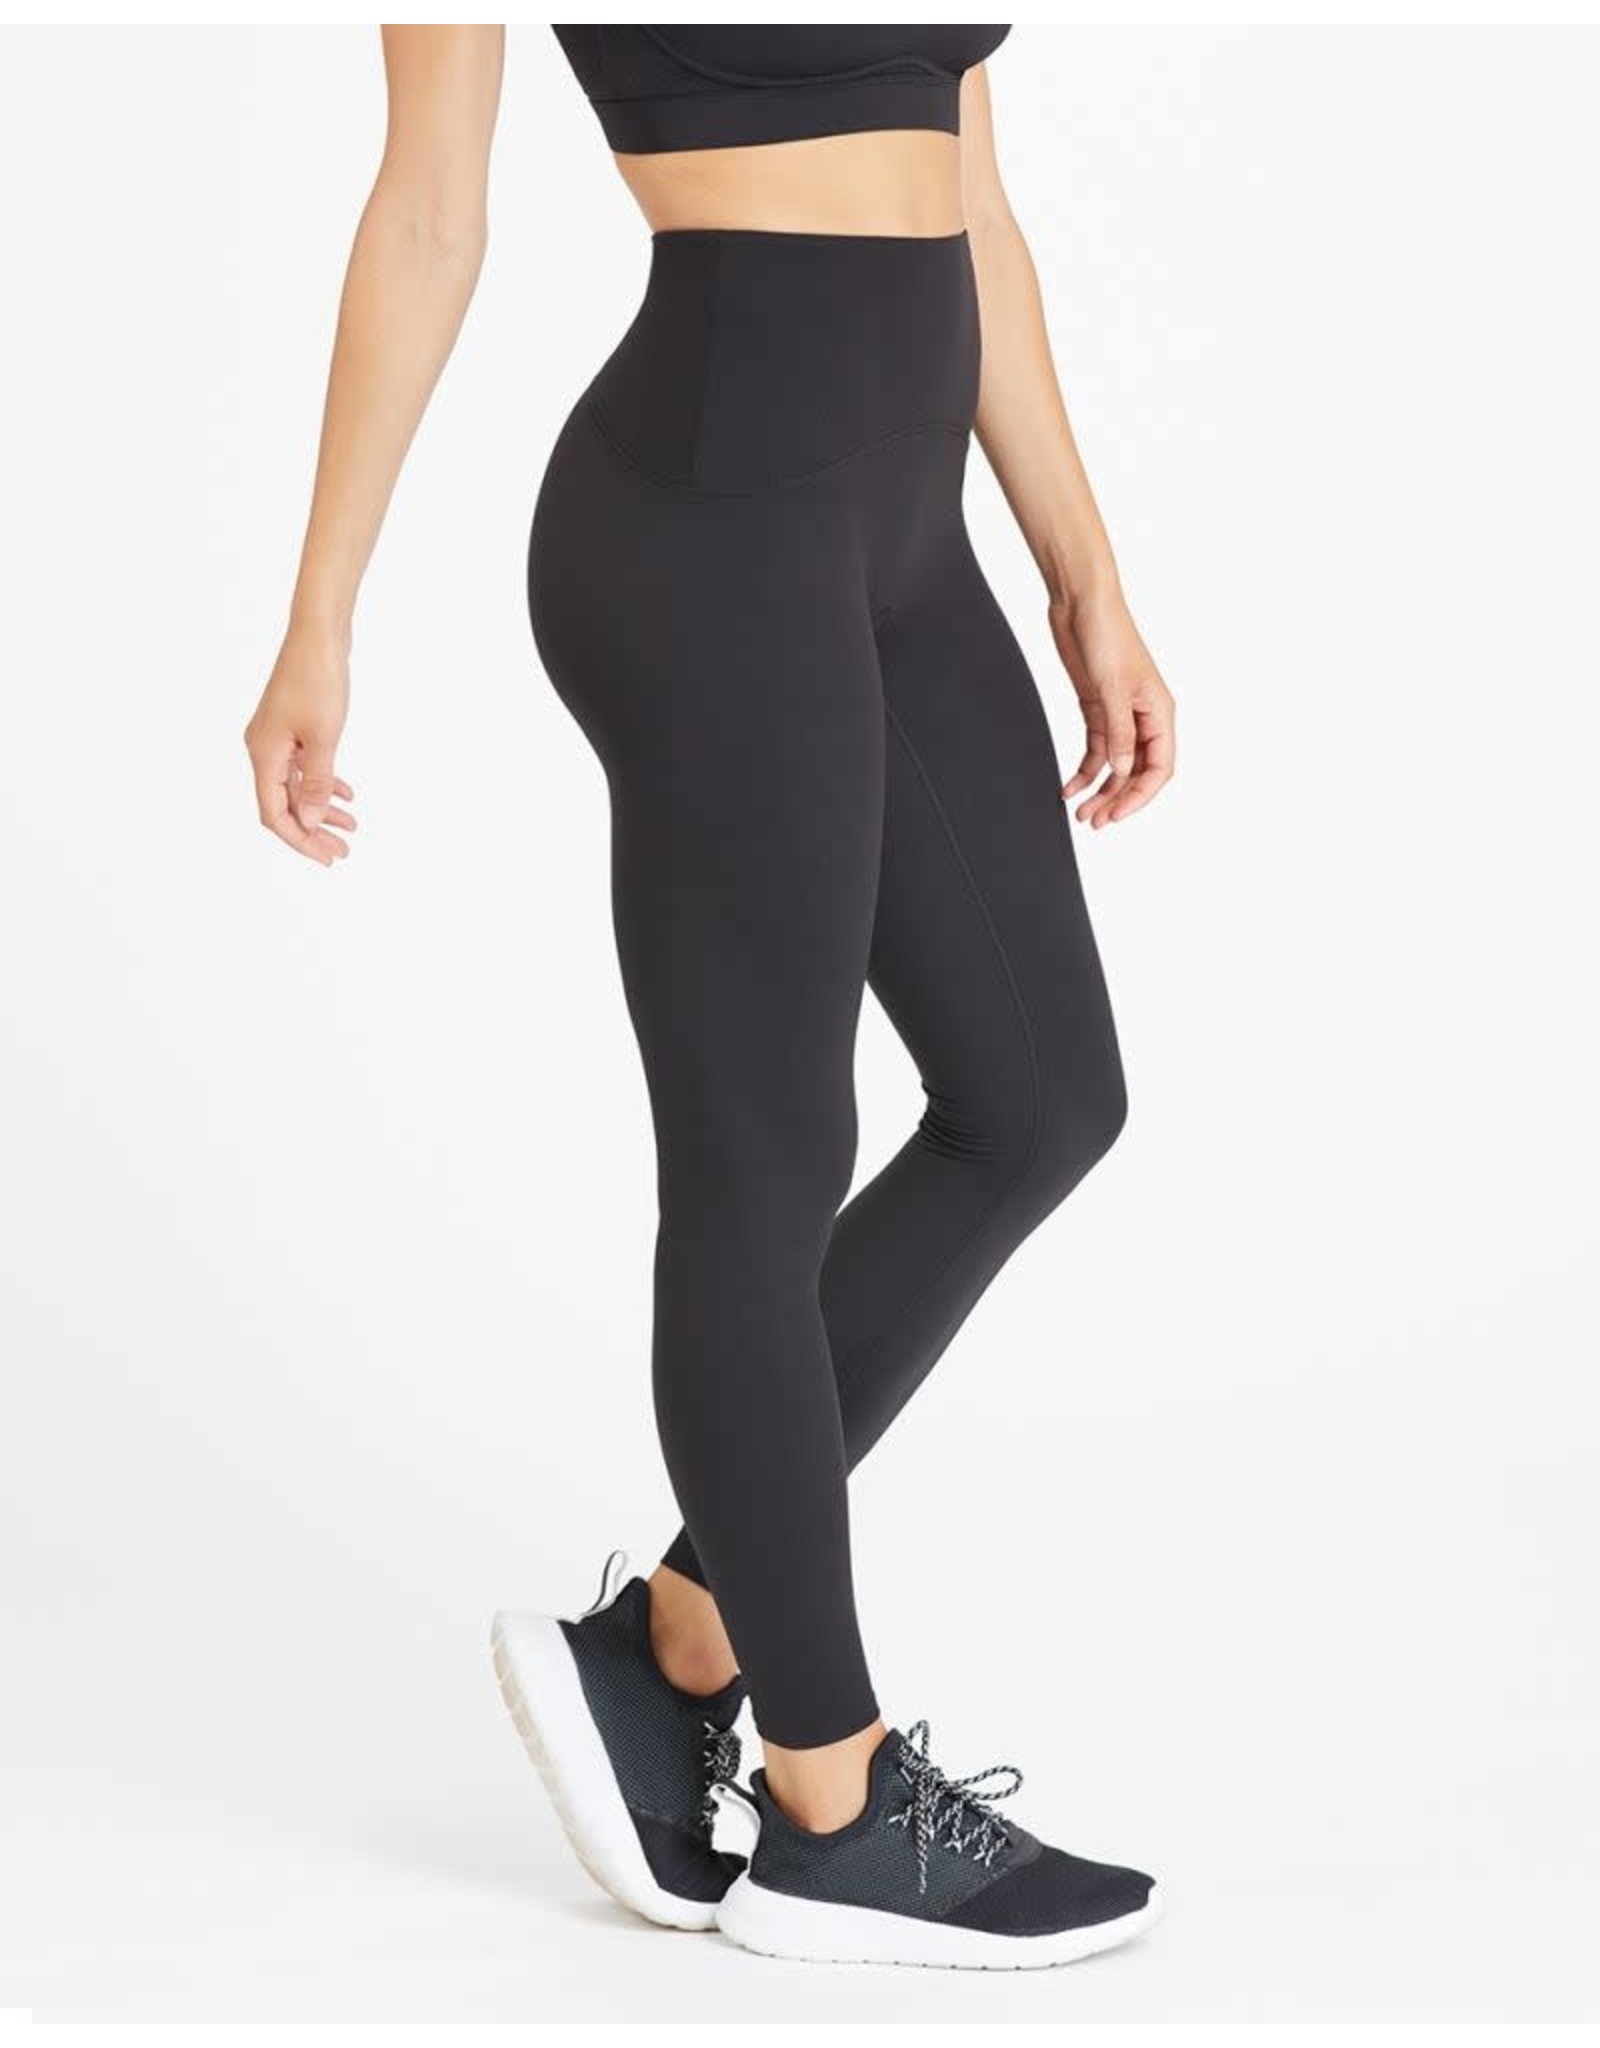 Spanx End of Season sale: Save up to 70% on Spanx shapewear styles -  Reviewed